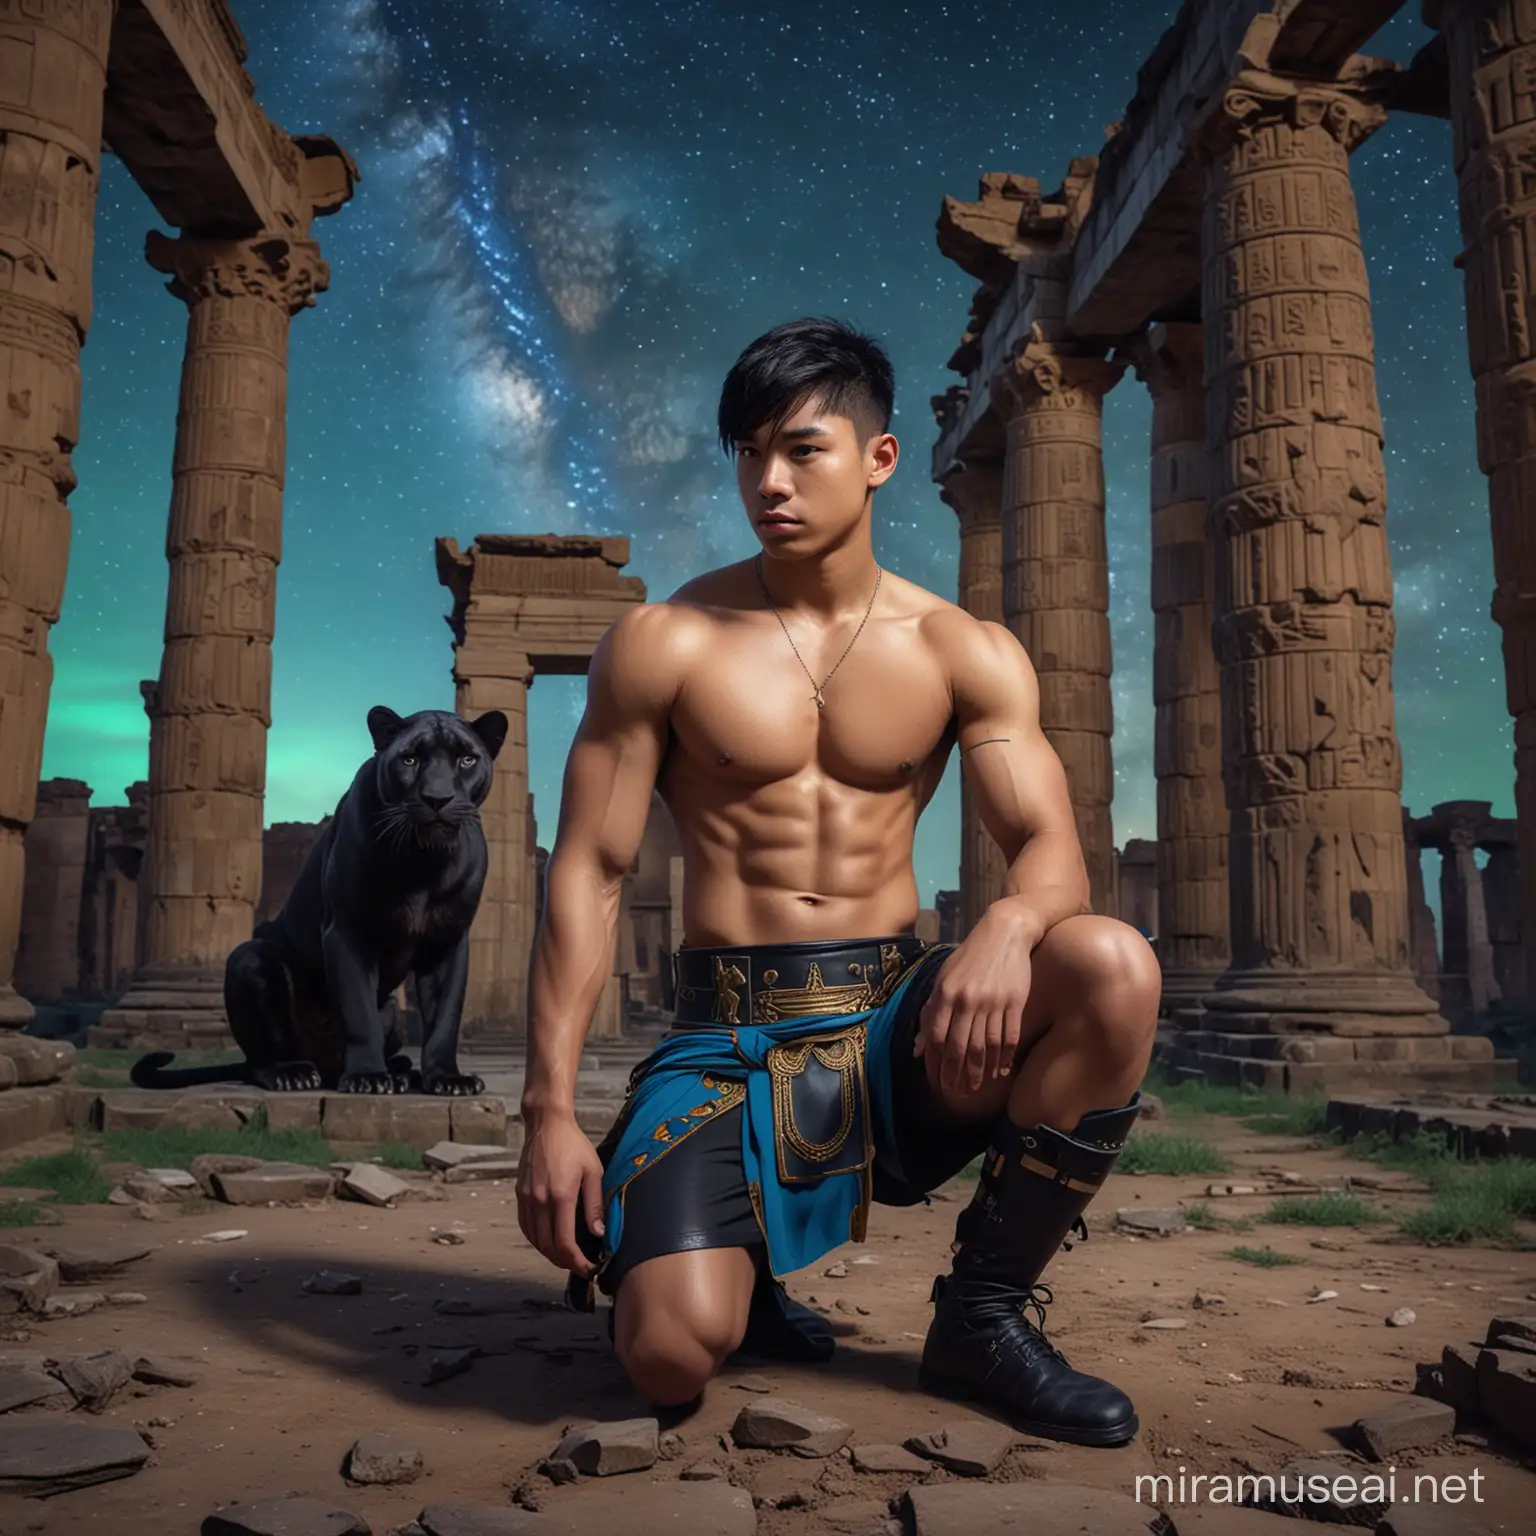 Sexy sweaty muscular young asian teen boy with undercut hairdress, crouching near huge black panthers. Dressed as a roman soldier shirtless. In the ruins of a egyptian temple. At night. The sky is full of stars with a huge galaxy. Blue and green neon colors ambient.